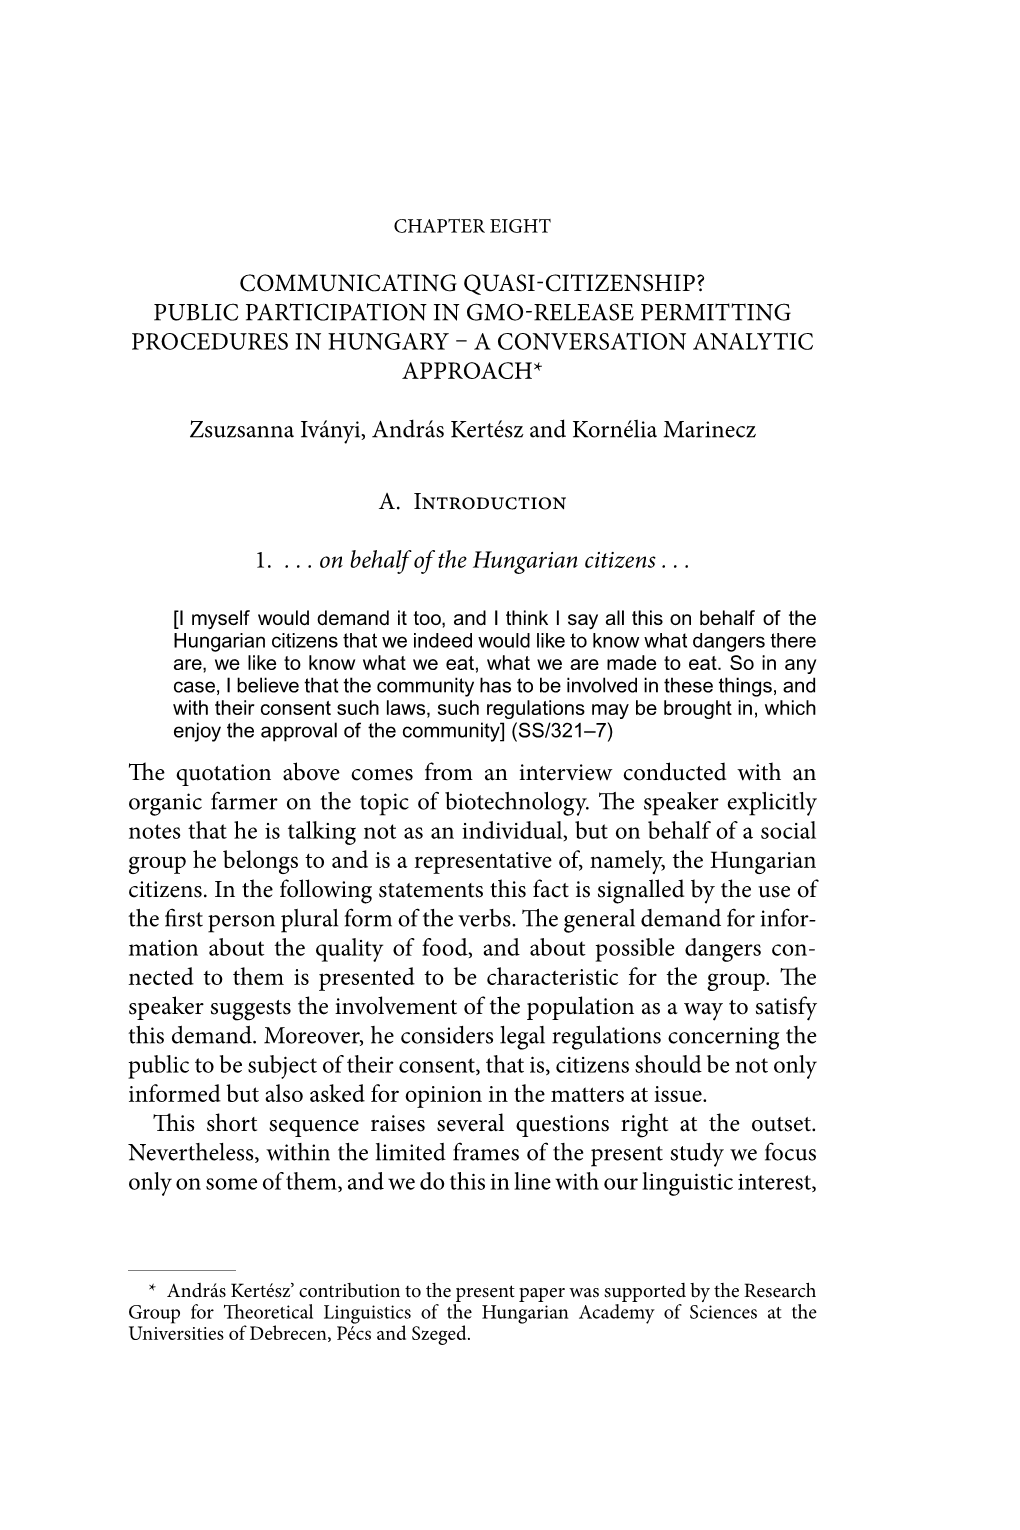 Communicating Quasi-Citizenship? Public Participation in Gmo-Release Permitting Procedures in Hungary – a Conversation Analytic Approach*